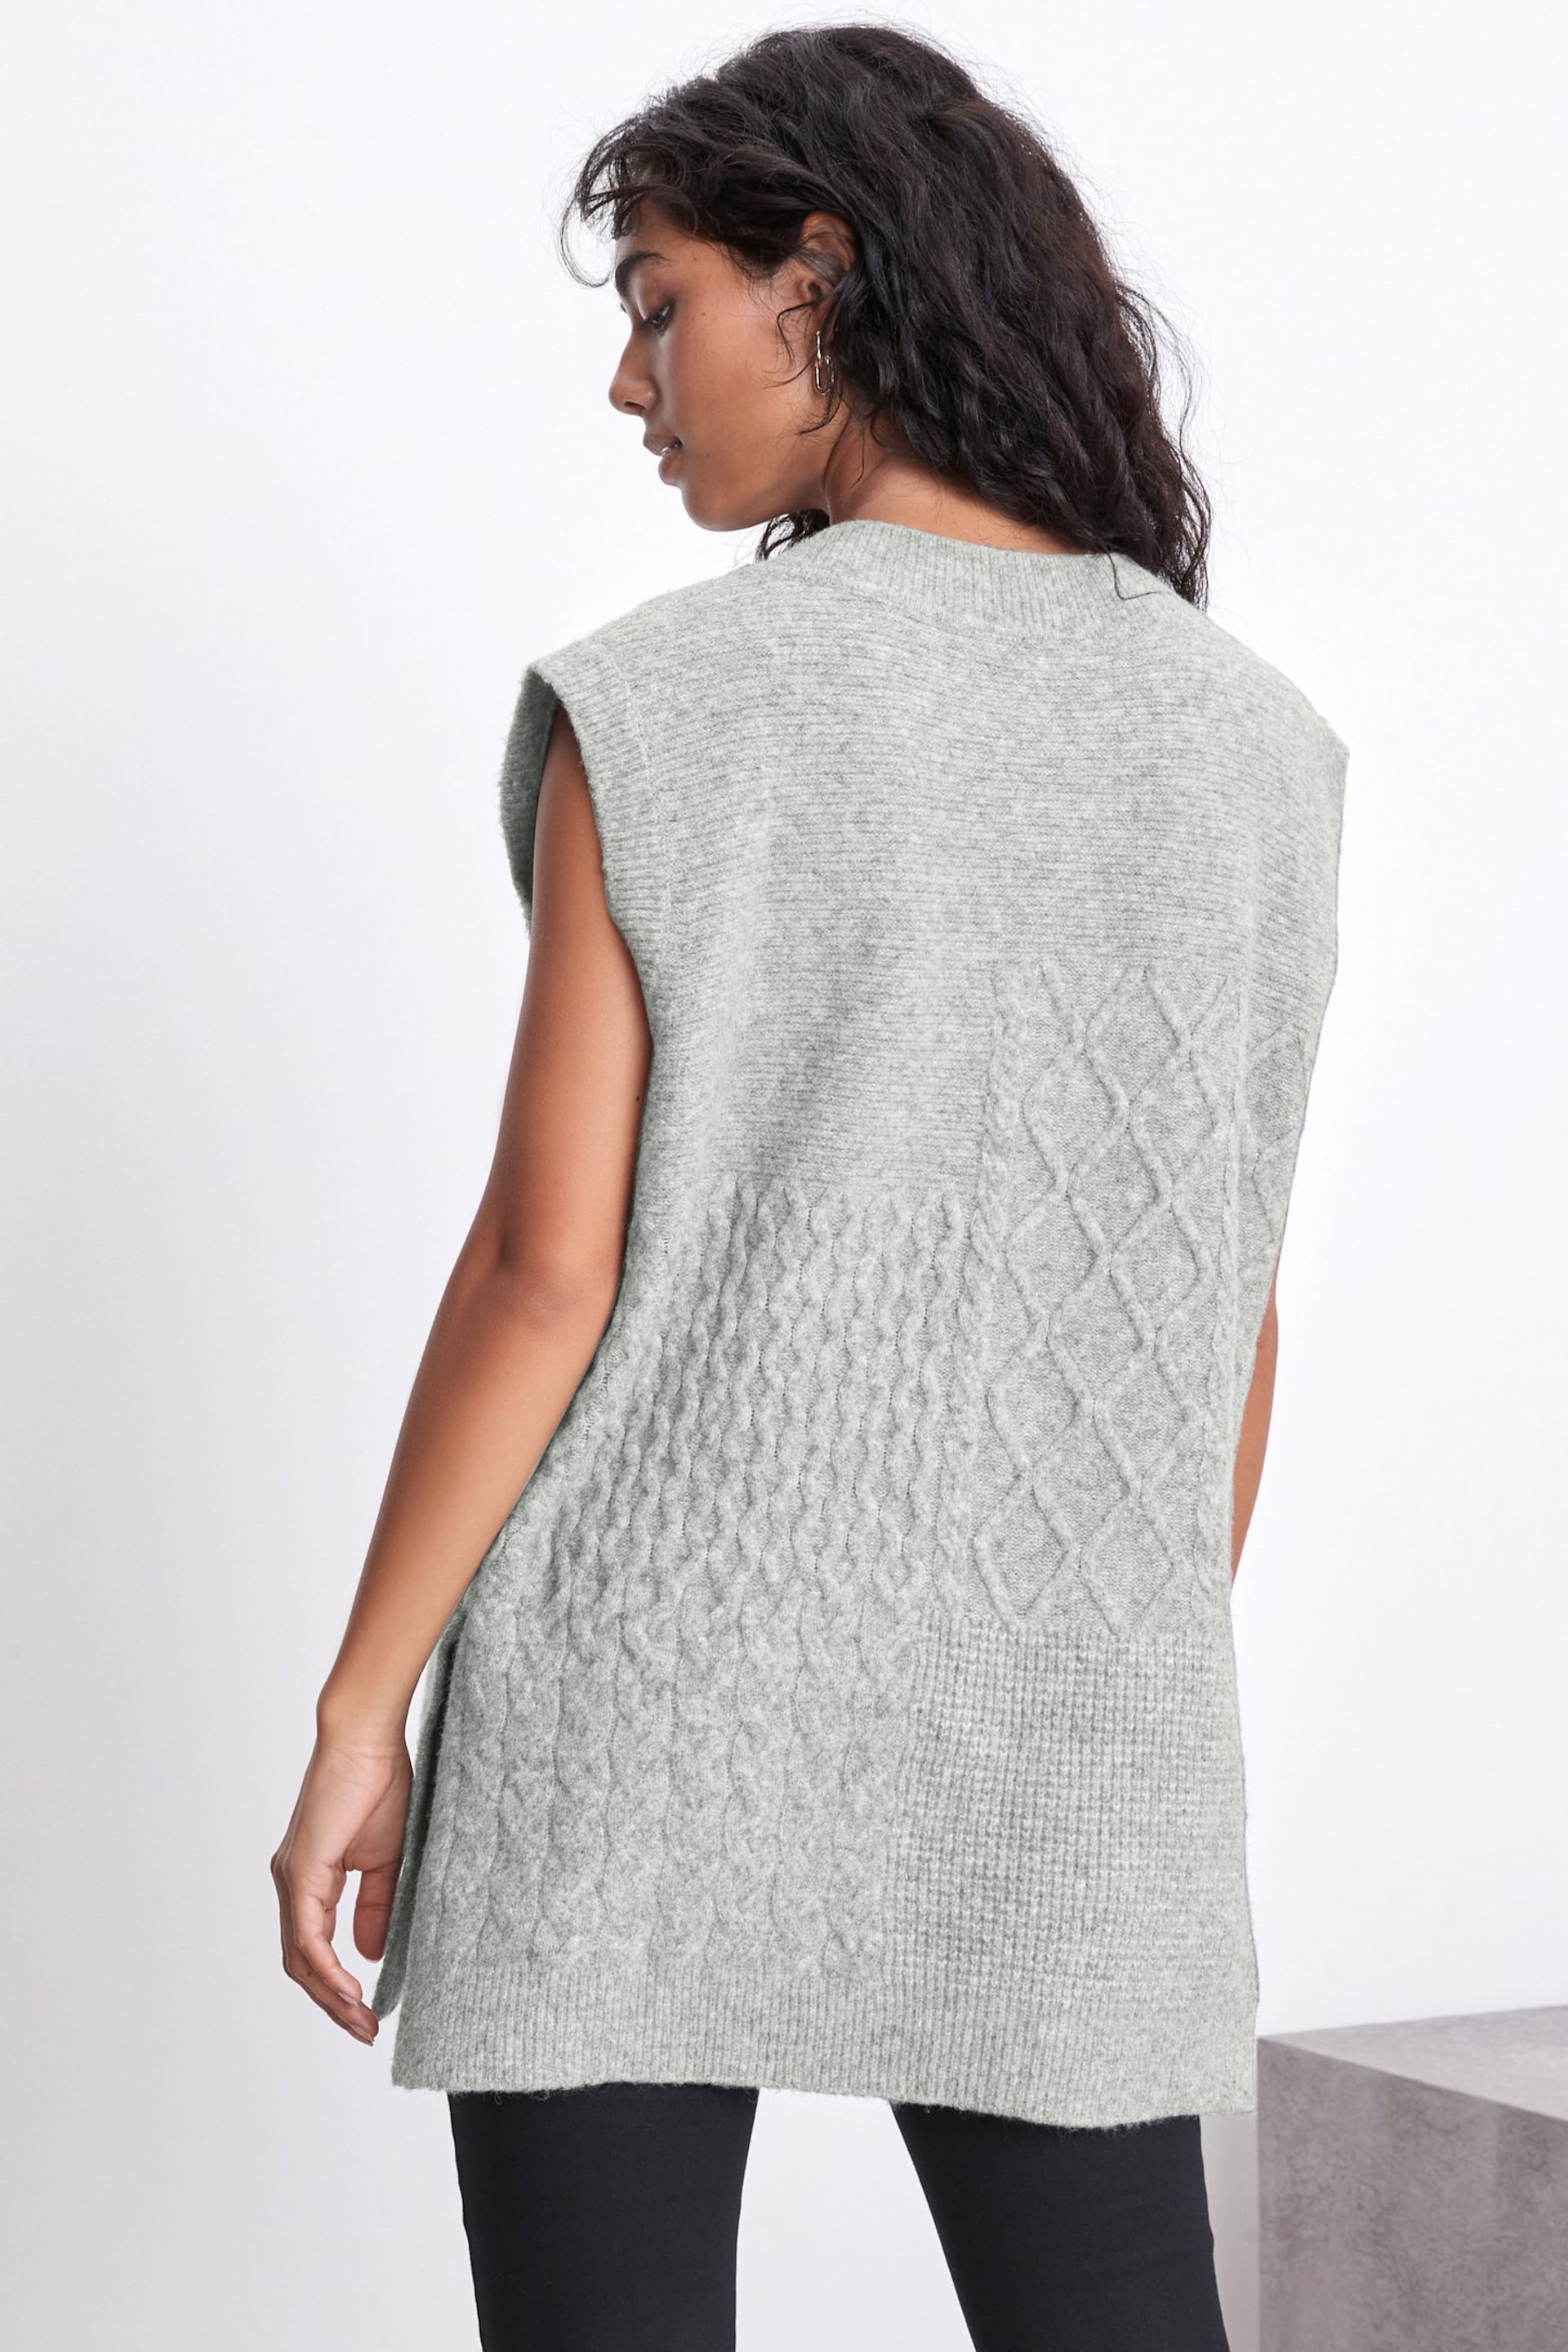 Grey V-Neck Cable Tank - Image 4 of 7